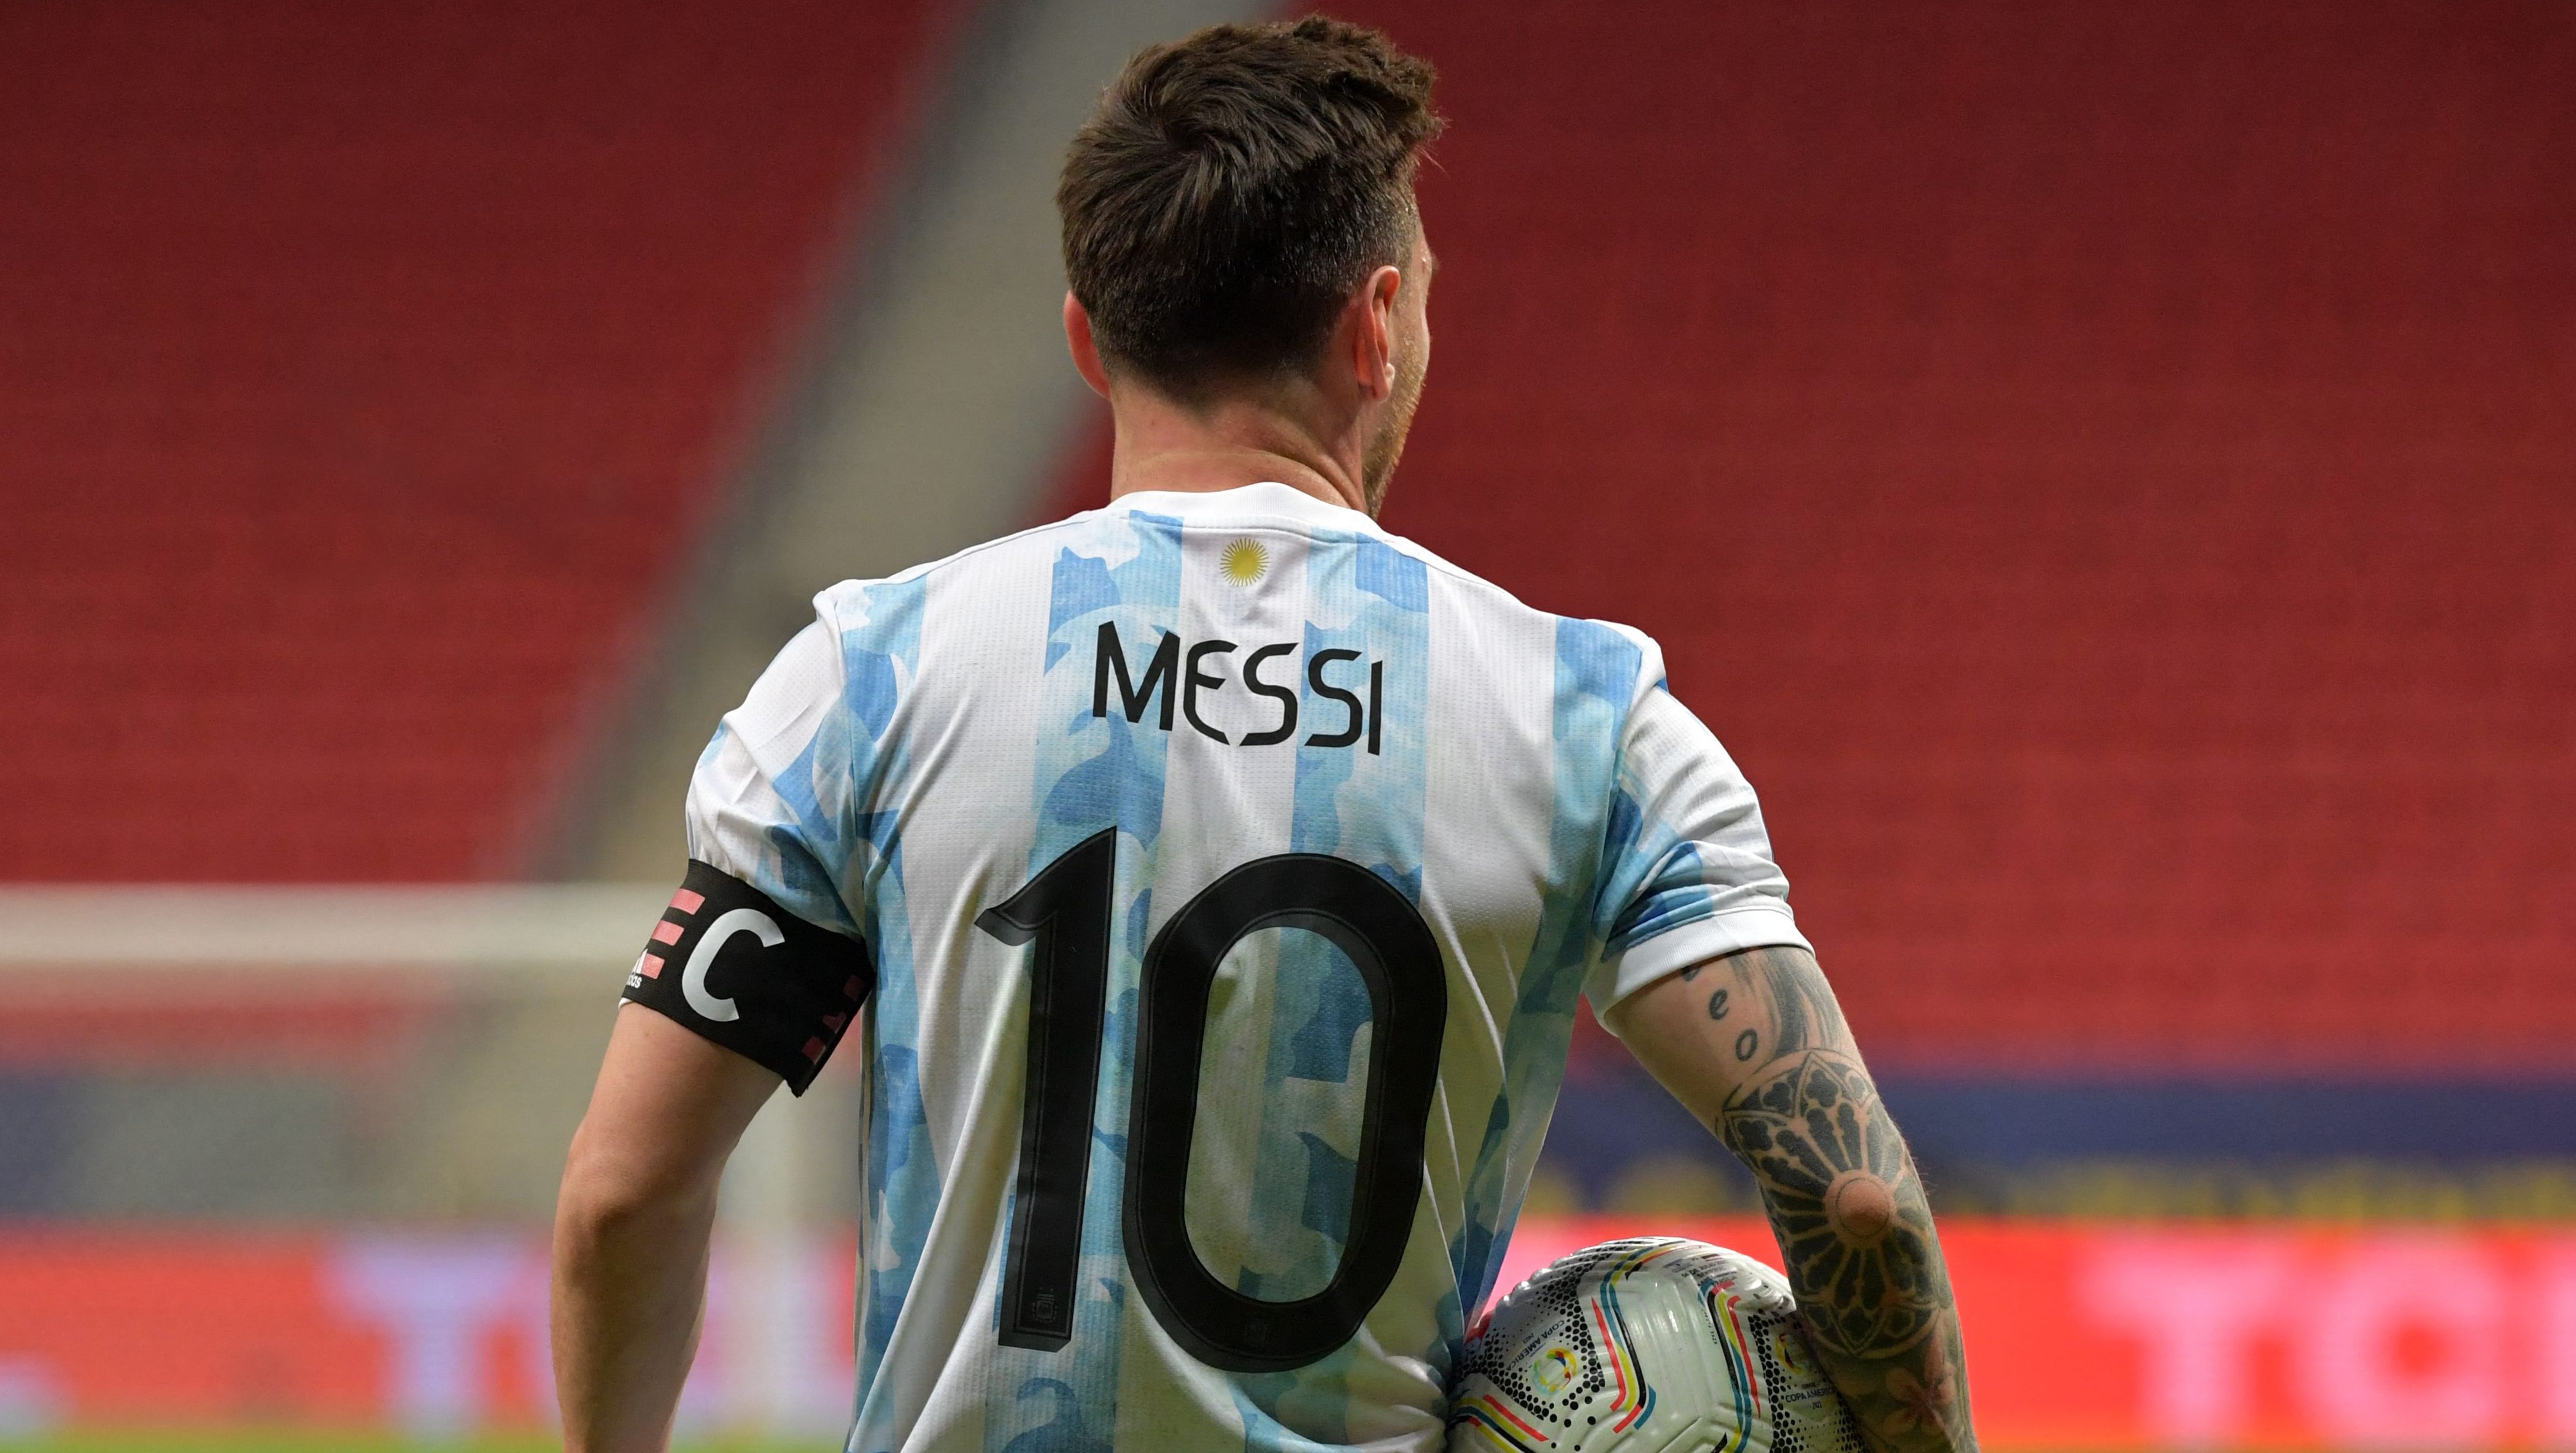 Brazil vs Argentina live stream: how to watch Copa America final anywhere  online